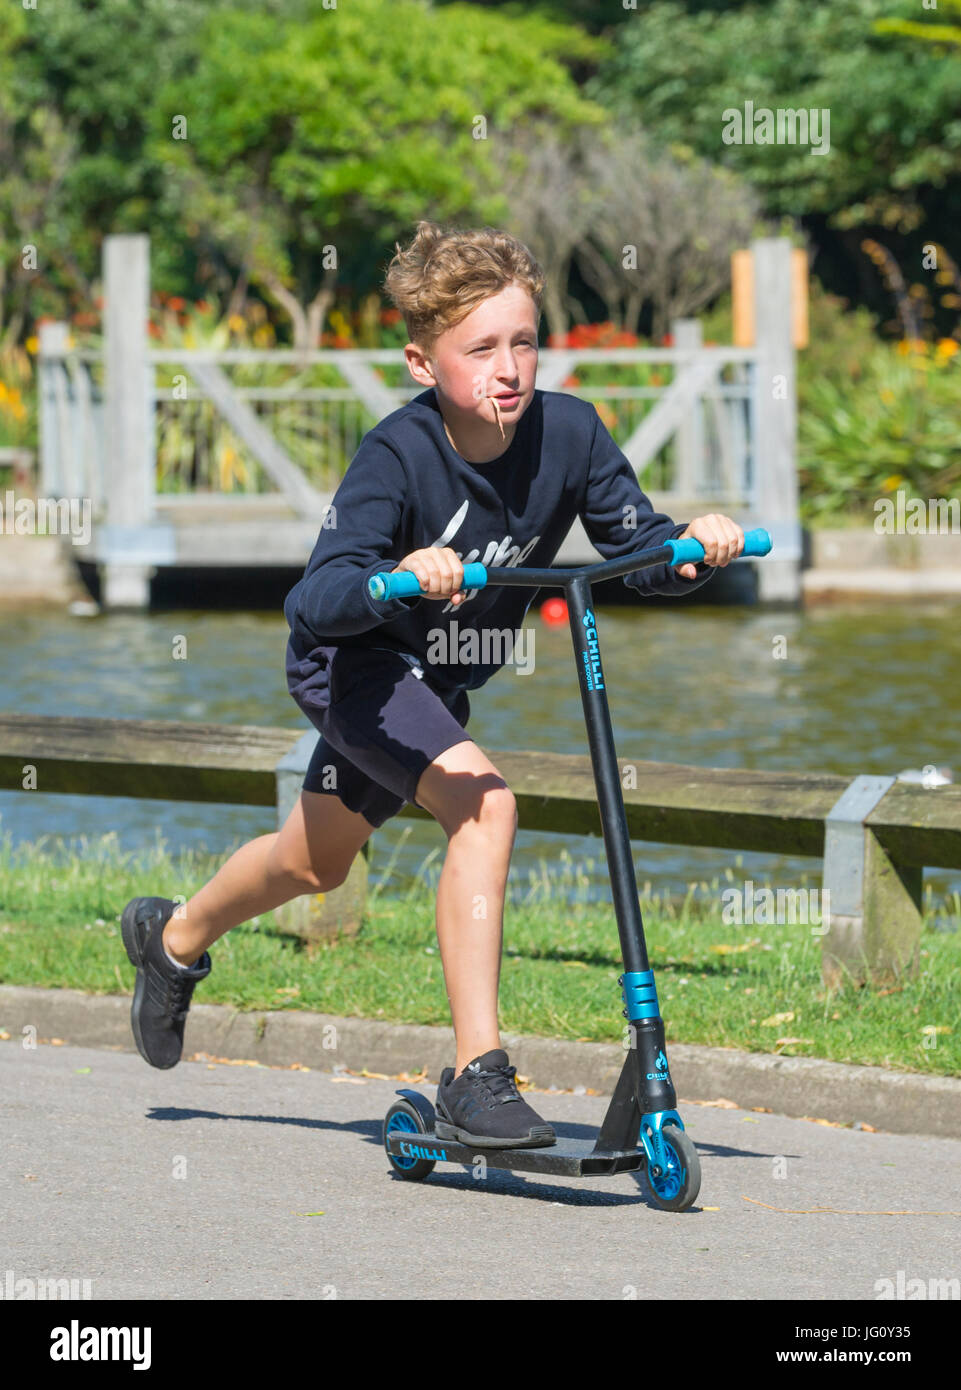 Young boy riding through a on scooter Stock Photo - Alamy